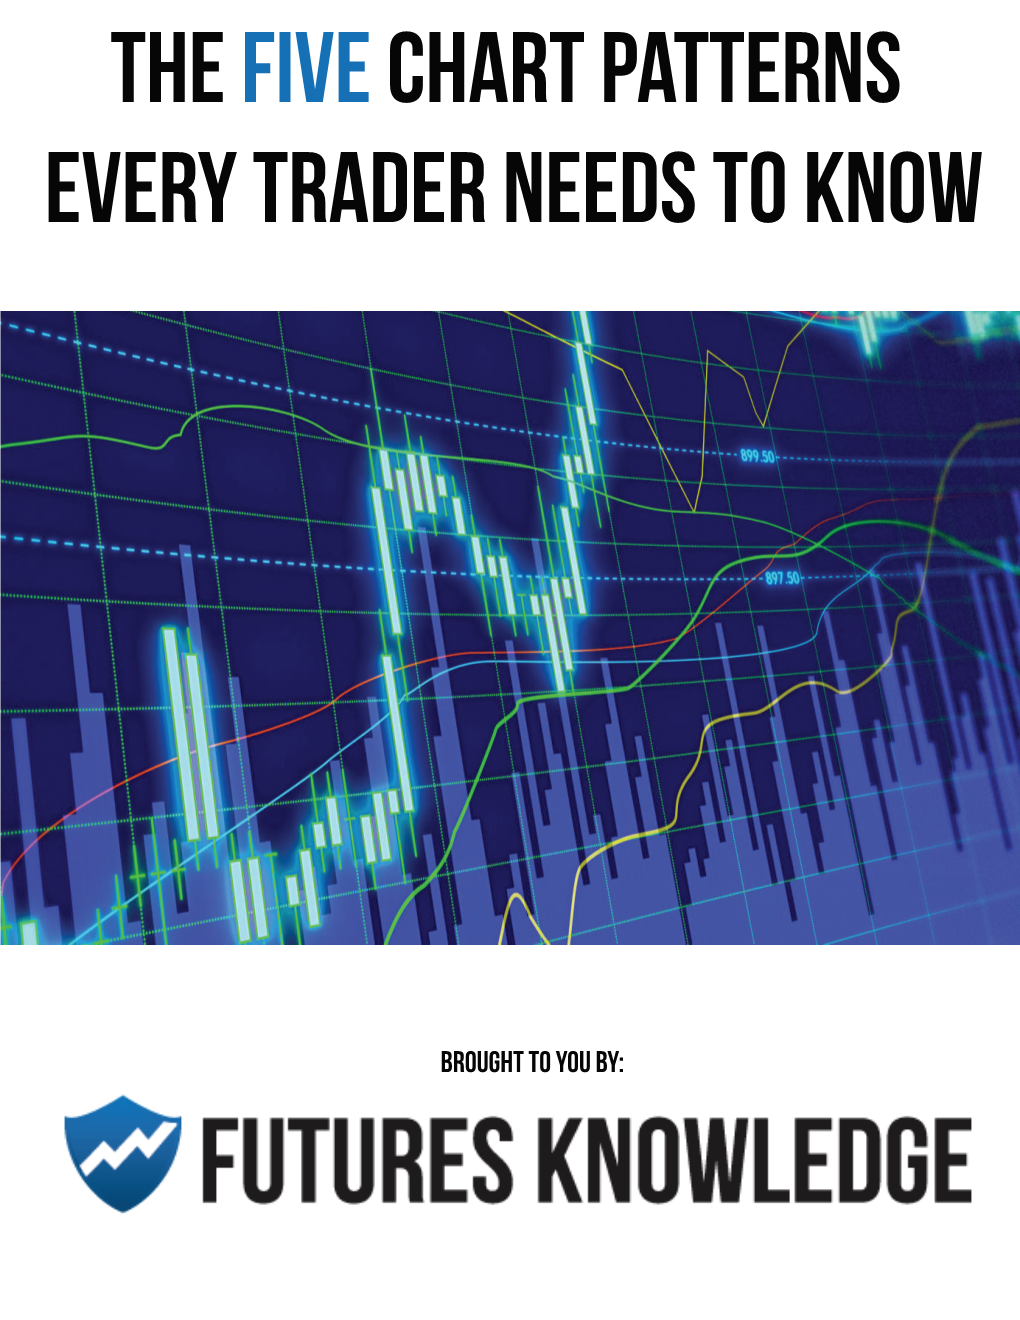 THE Five CHART PATTERNS EVERY TRADER NEEDS to KNOW